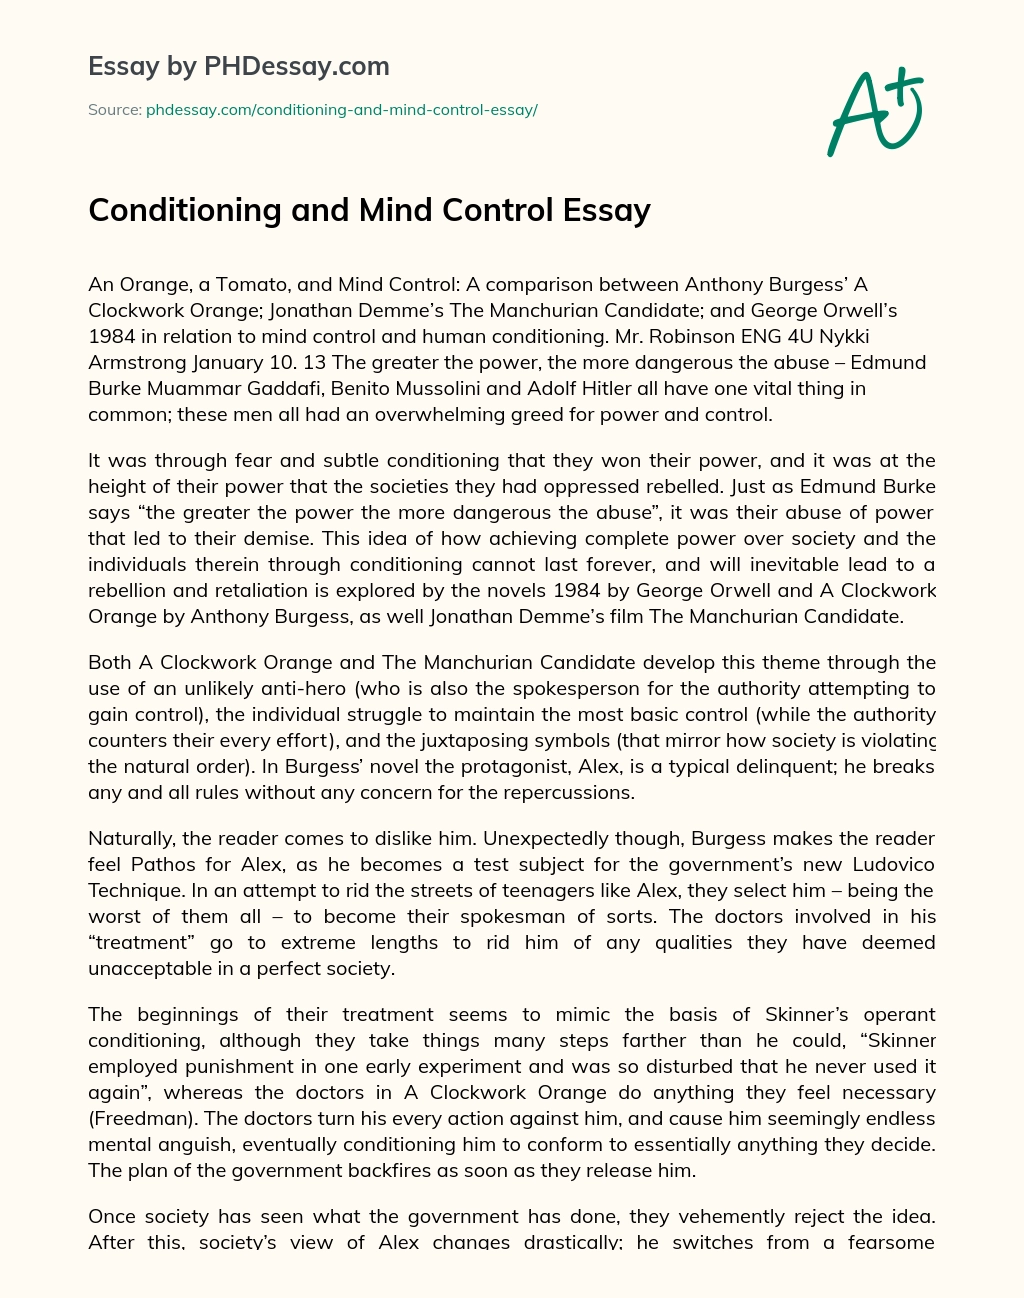 Conditioning and Mind Control Essay essay